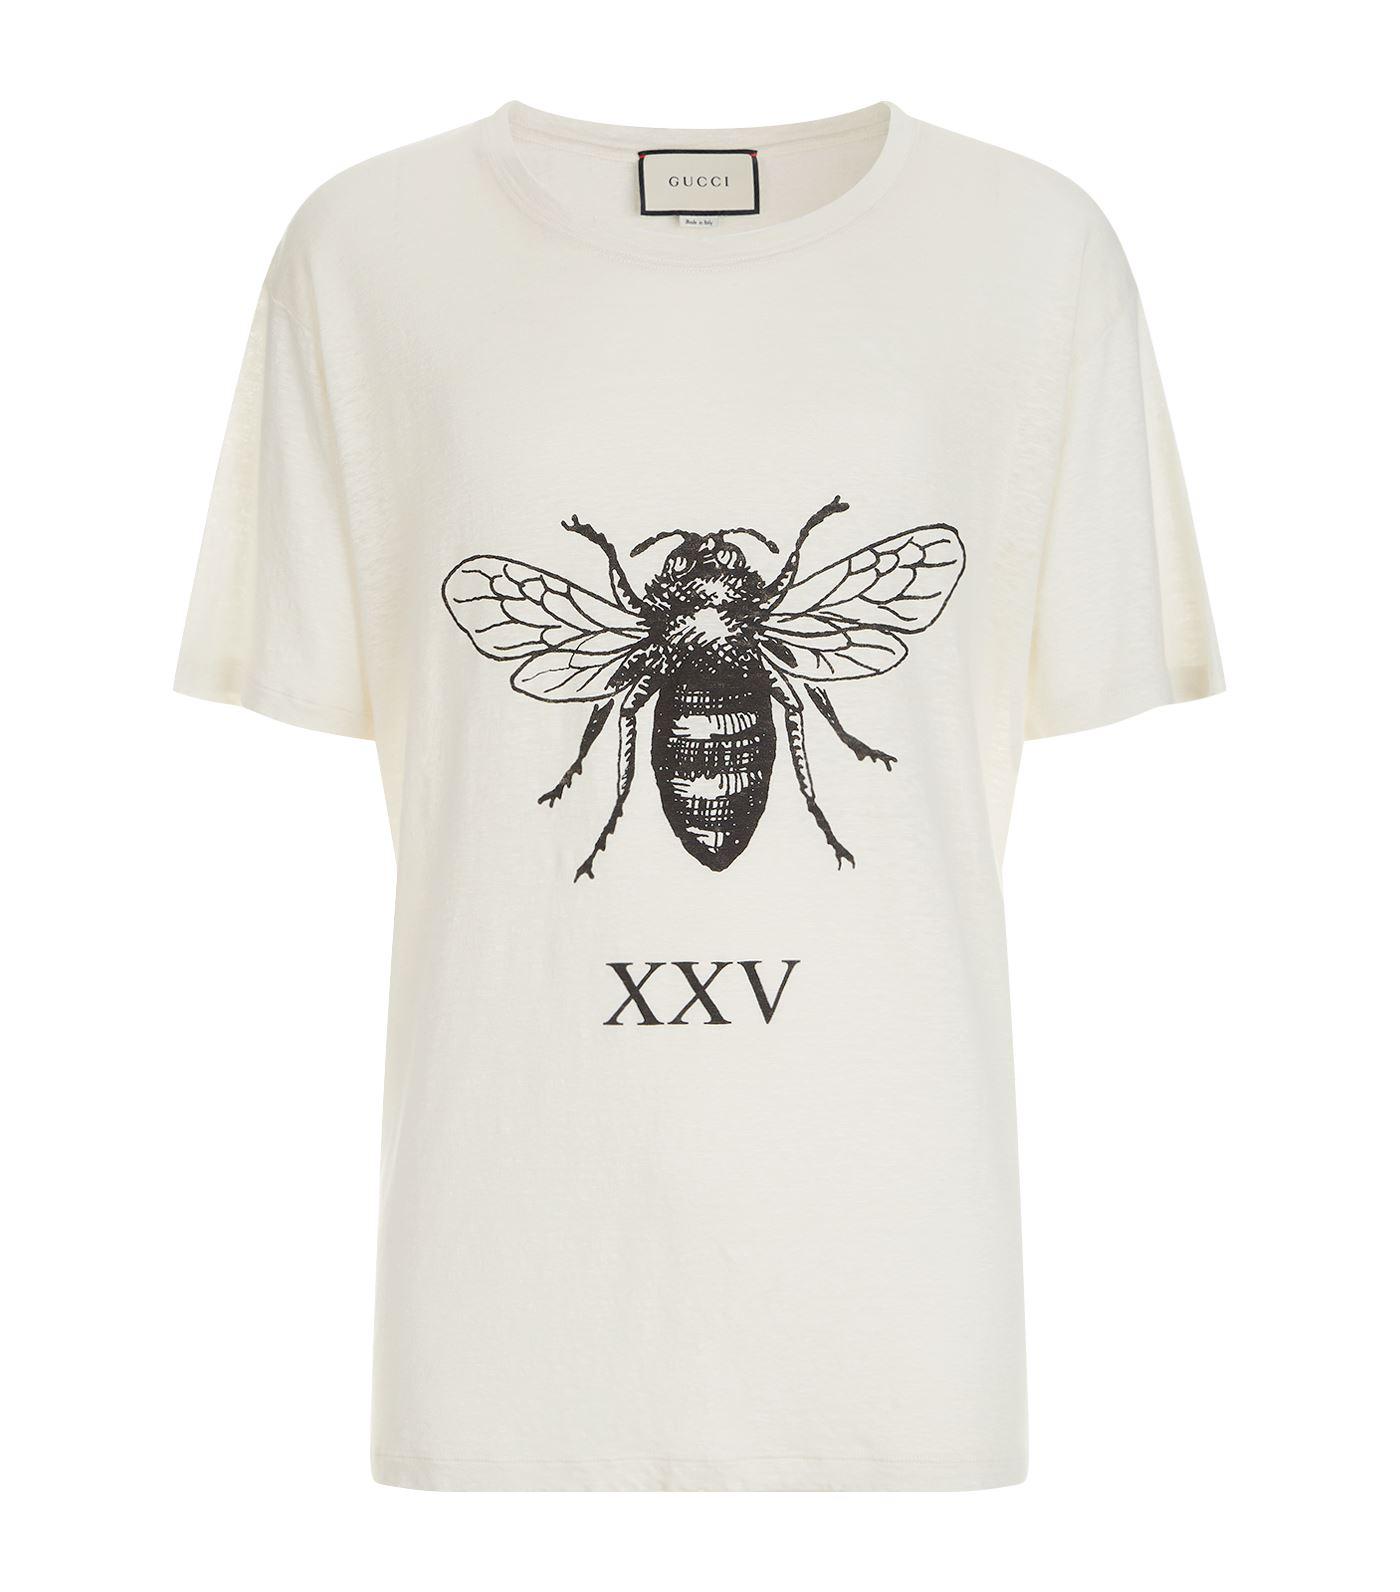 Gucci Bee Print Linen T-shirt in White for Men - Lyst